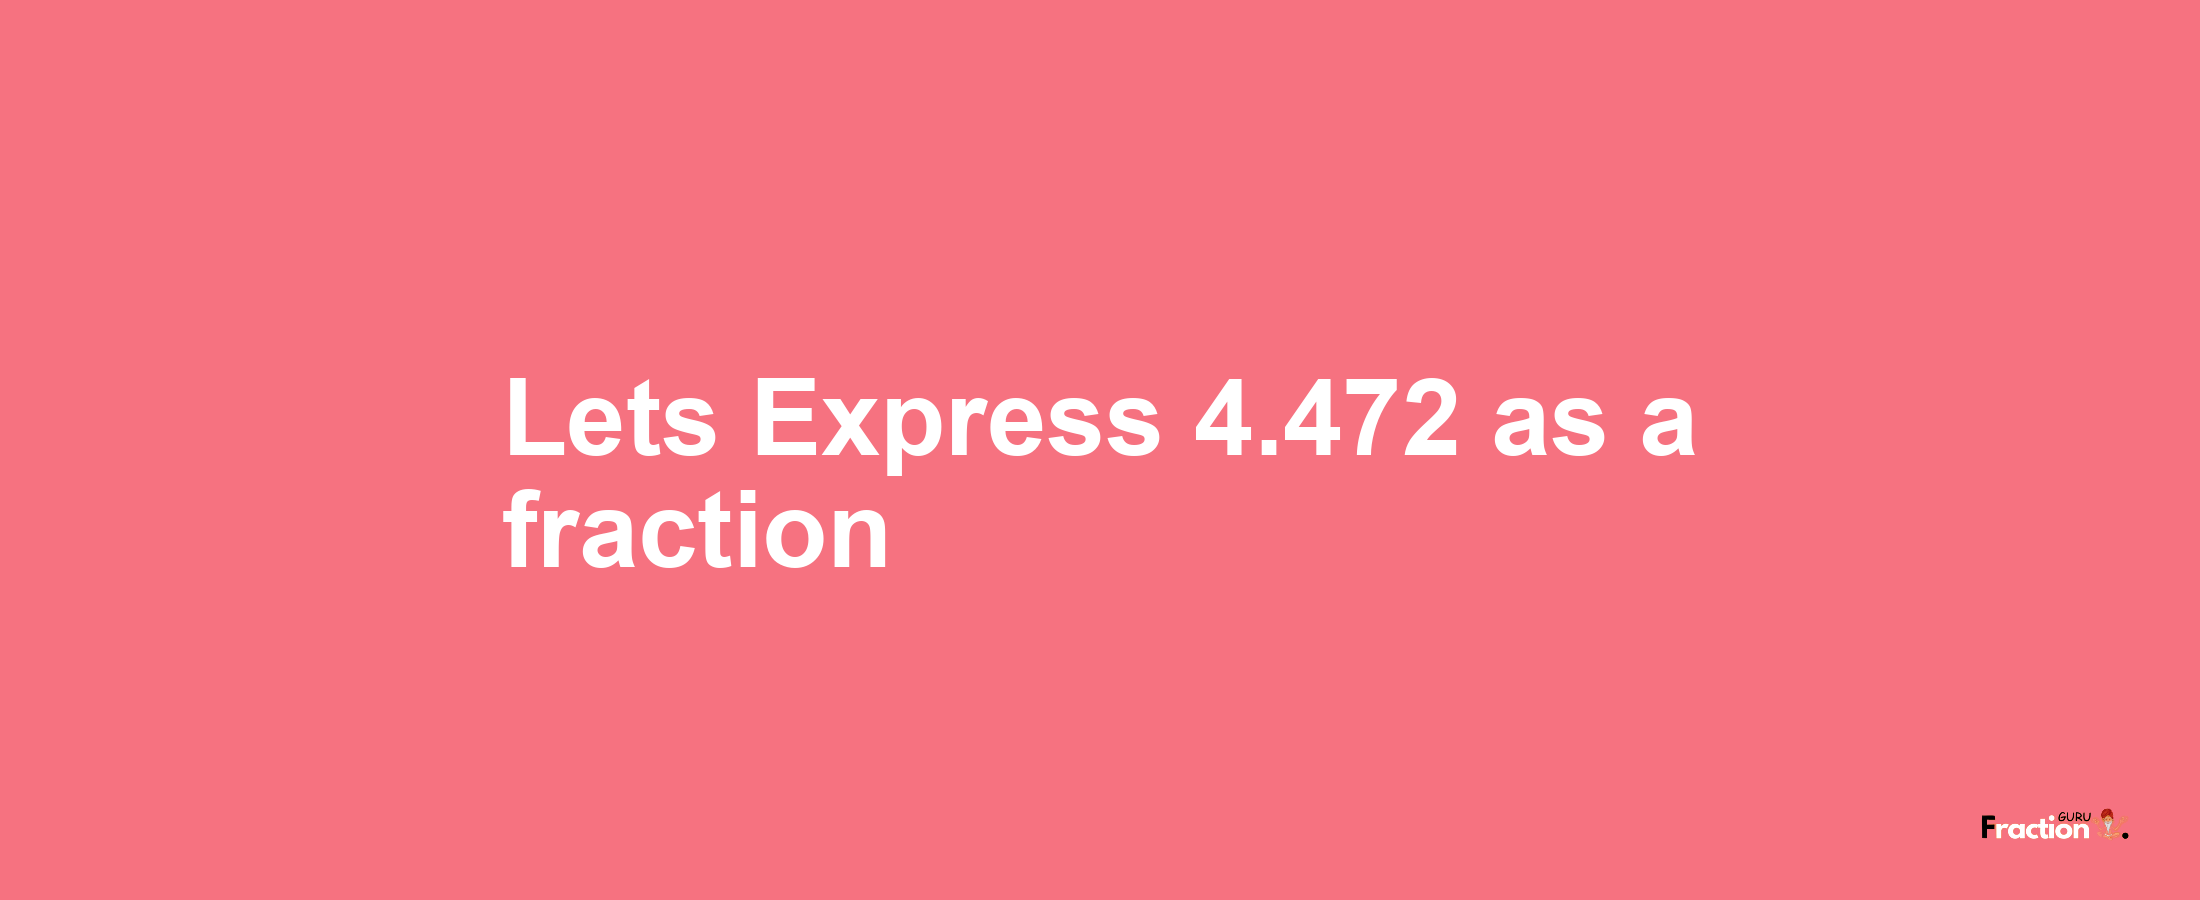 Lets Express 4.472 as afraction